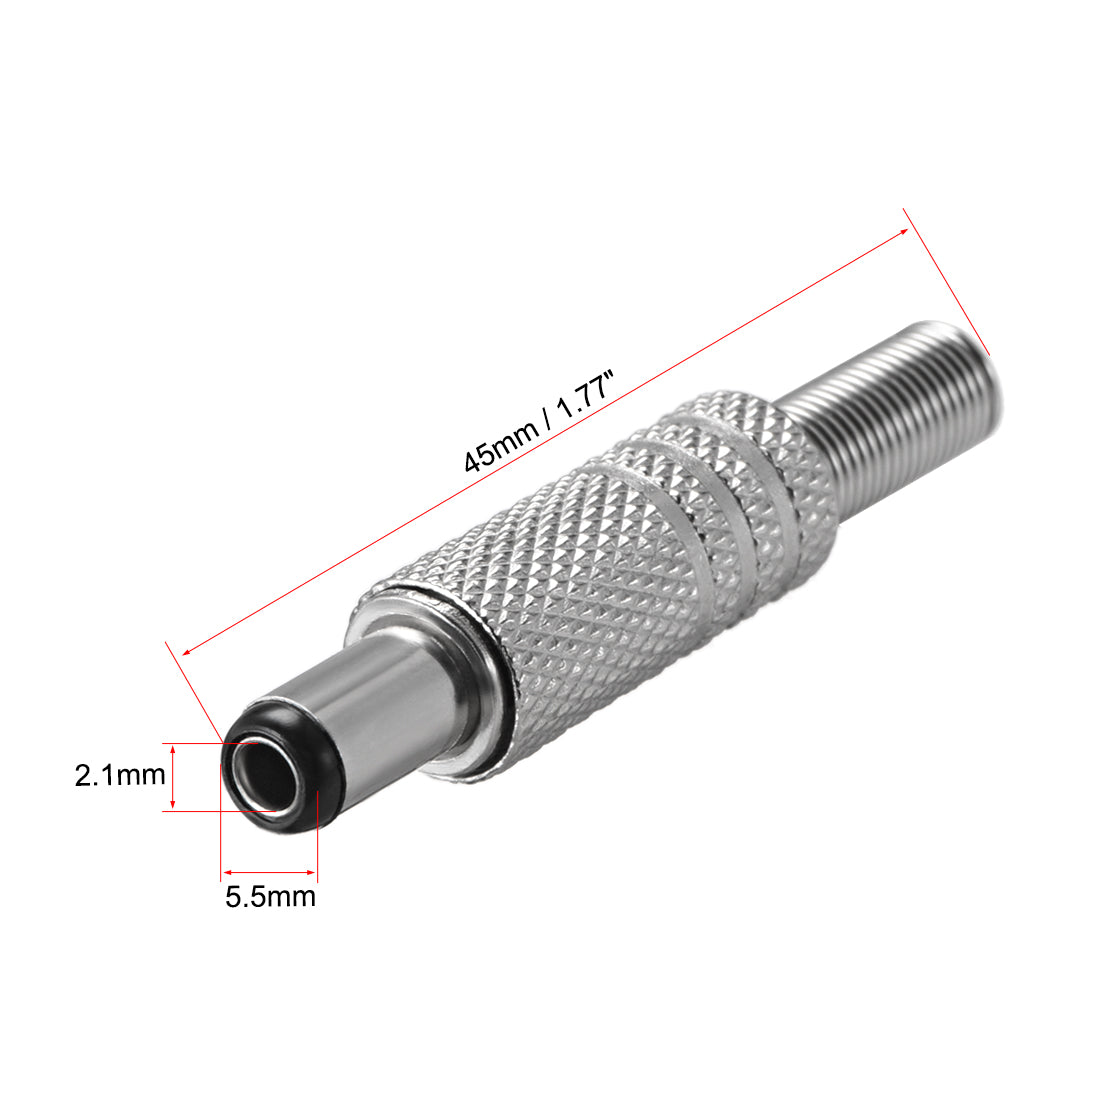 uxcell Uxcell DC Male Connector 5.5mm x 2.1mm x 9mm Power Cable Jack Adapter Coupler Silver Tone 10Pcs